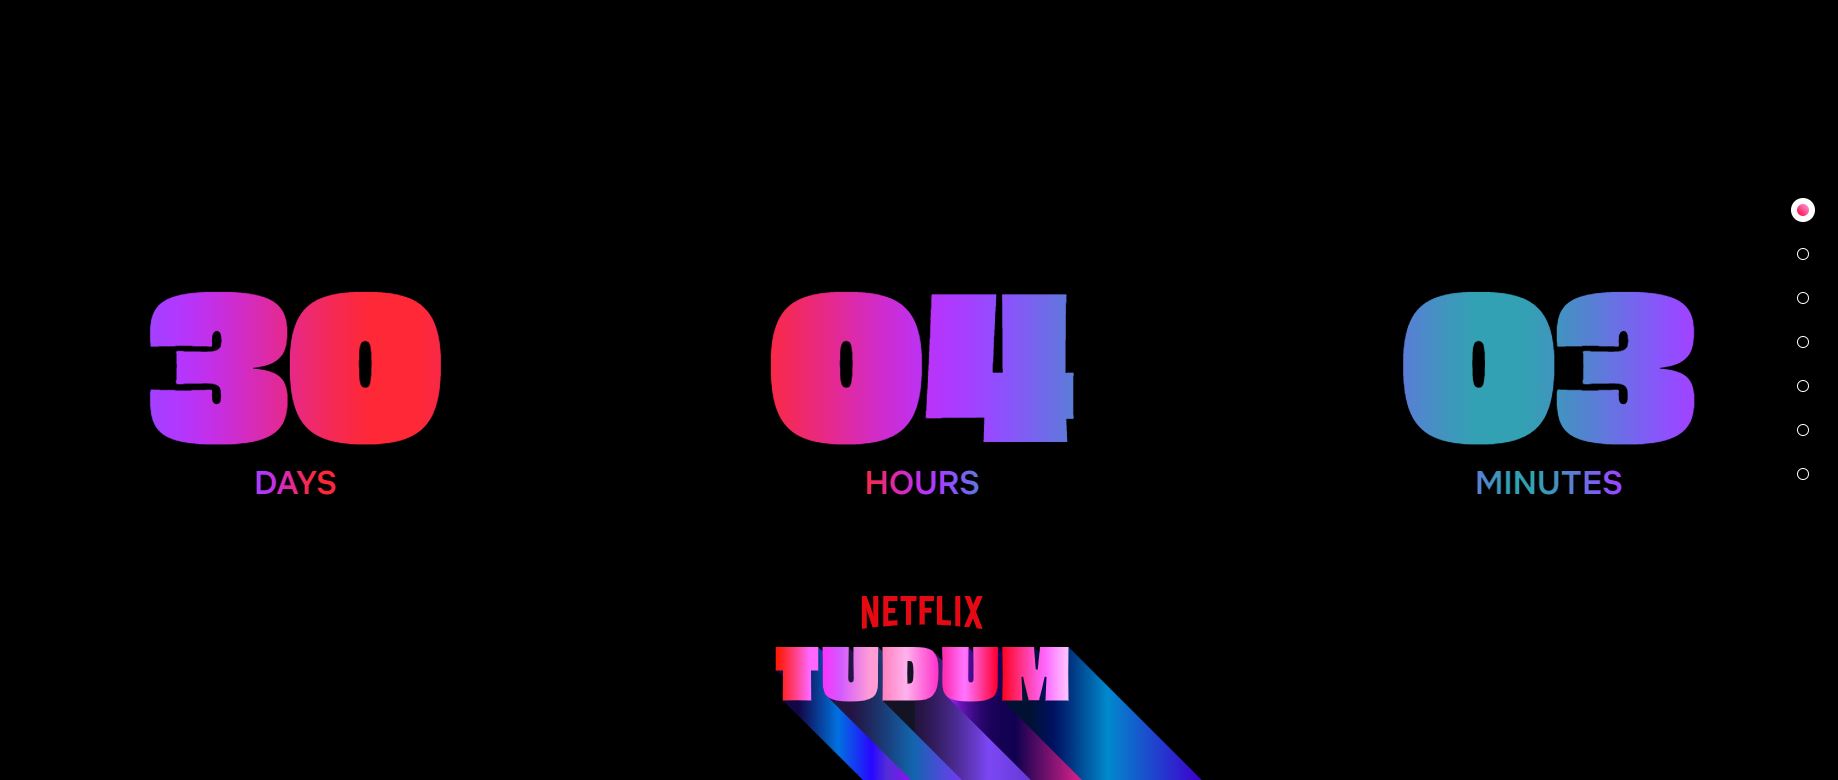 Netflix Invites You to Its First-Ever Global Fan Event, TUDUM, on September 25, 2021